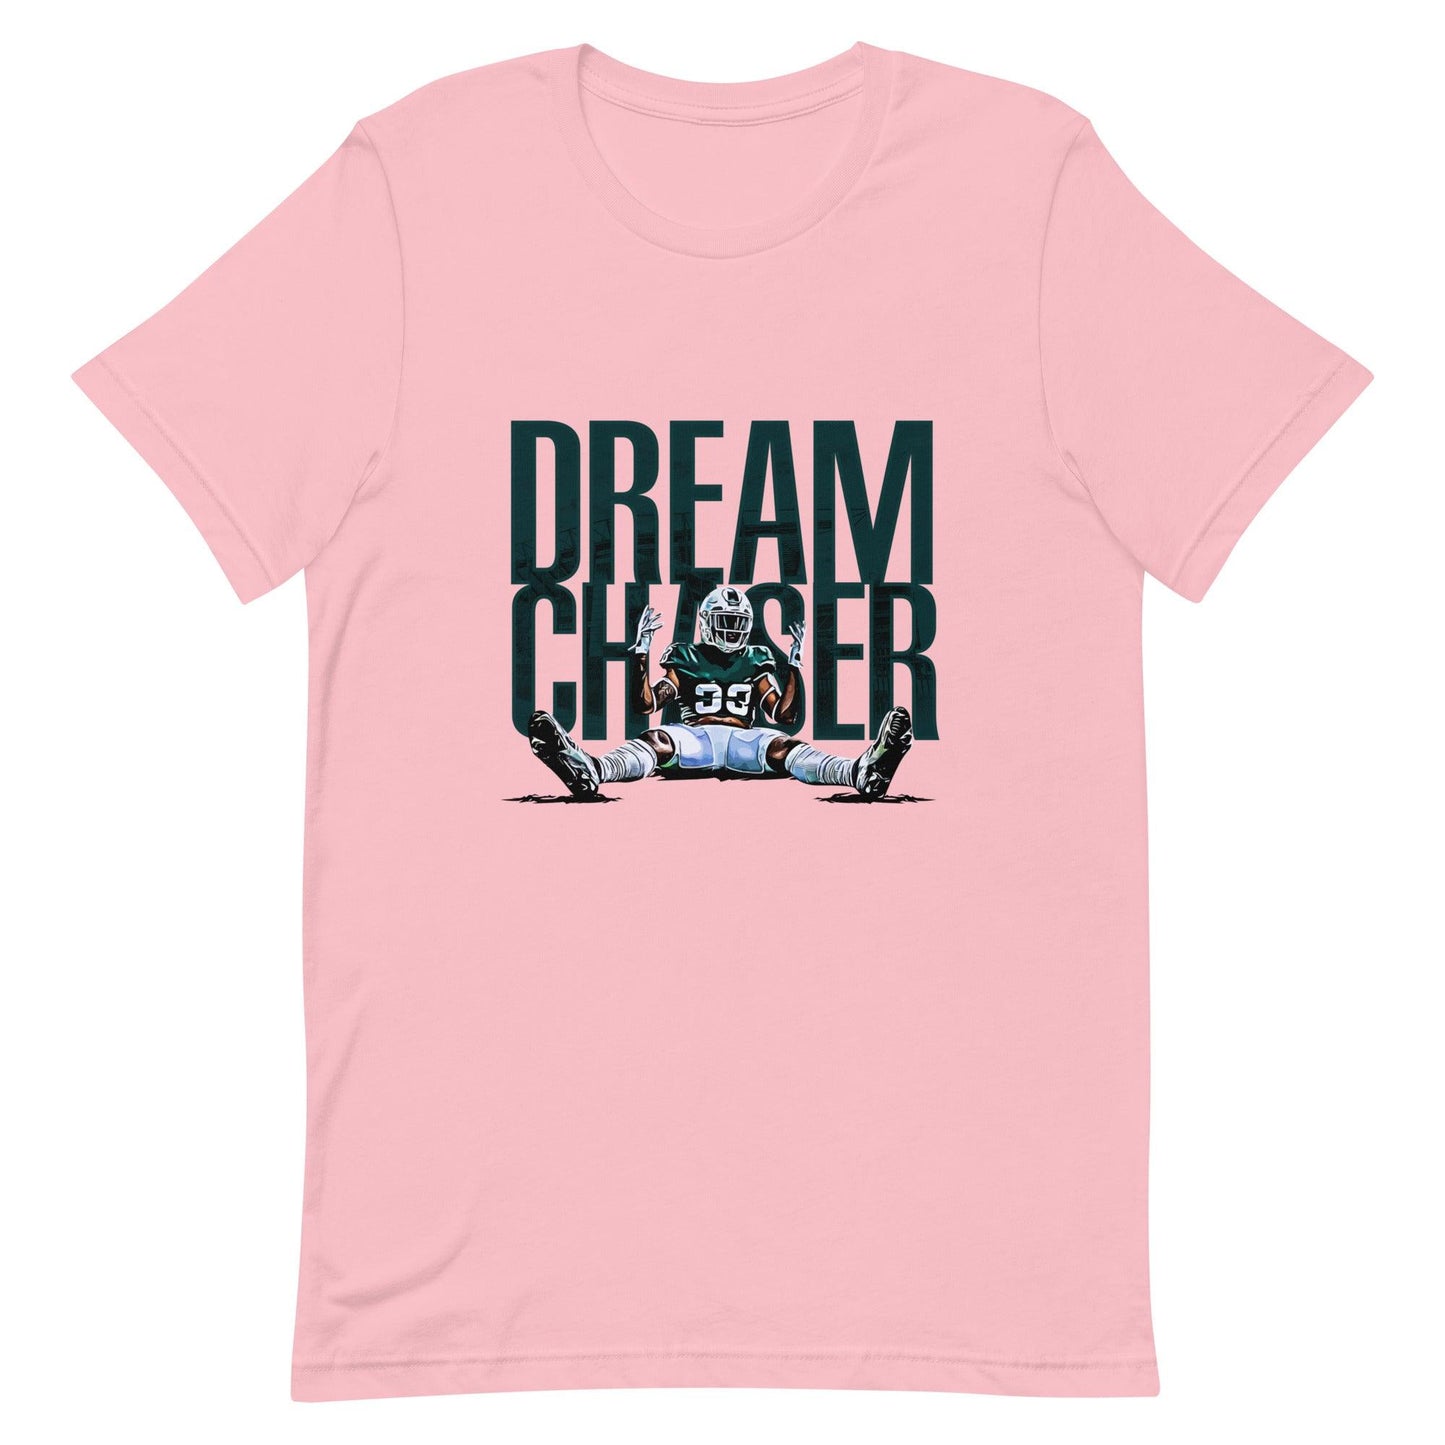 Kendell Brooks "Dream Chaser" t-shirt - Fan Arch